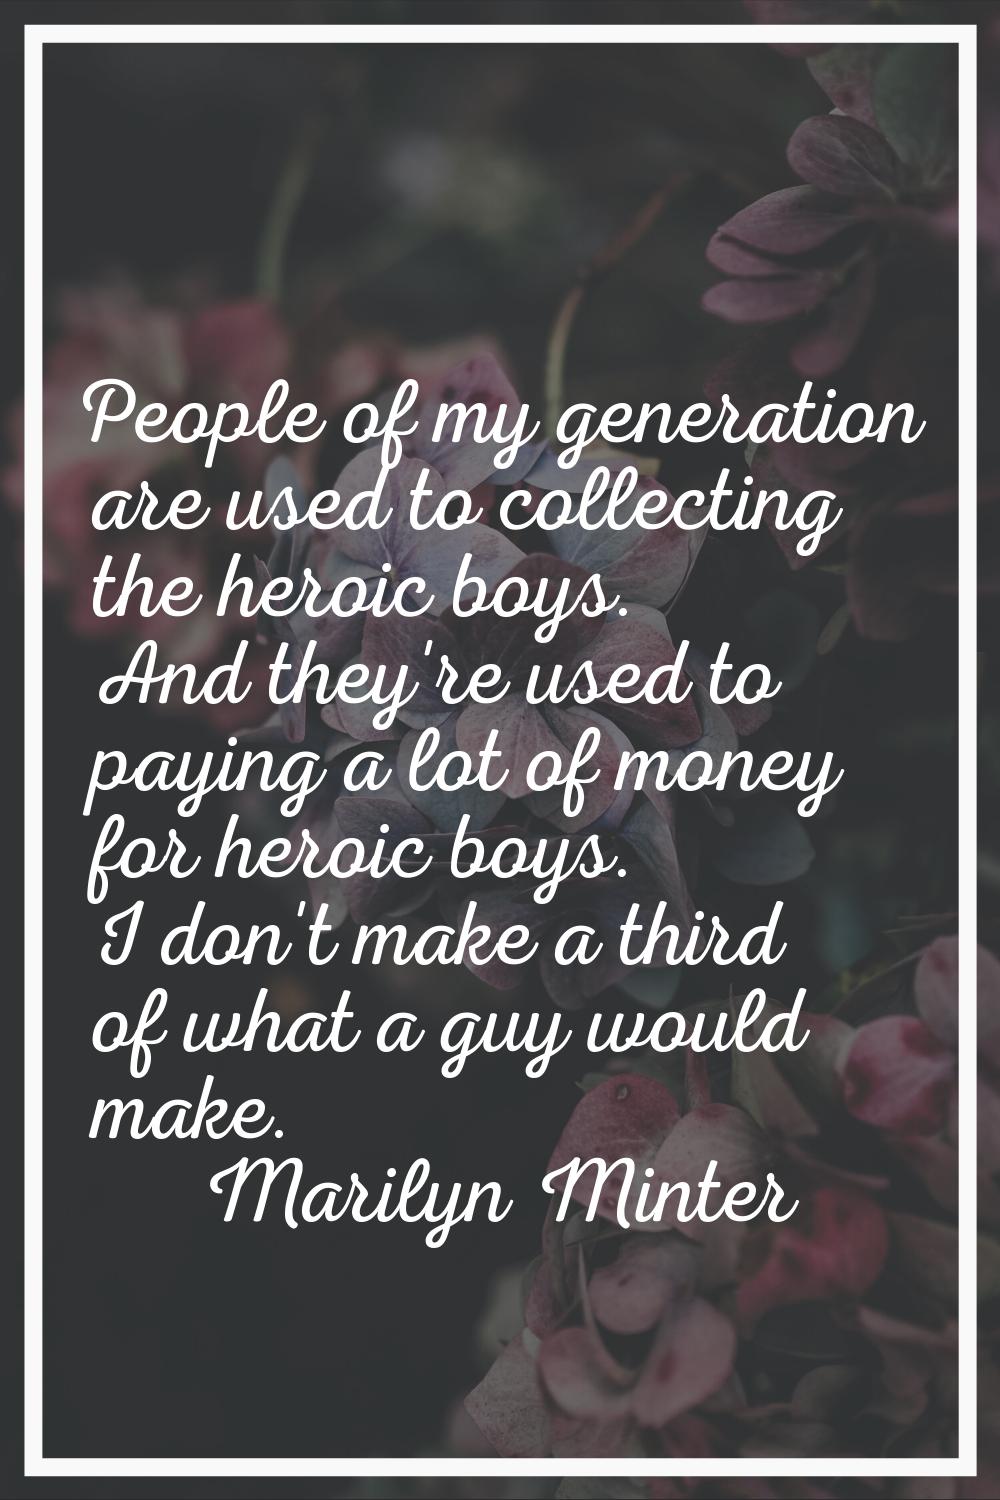 People of my generation are used to collecting the heroic boys. And they're used to paying a lot of